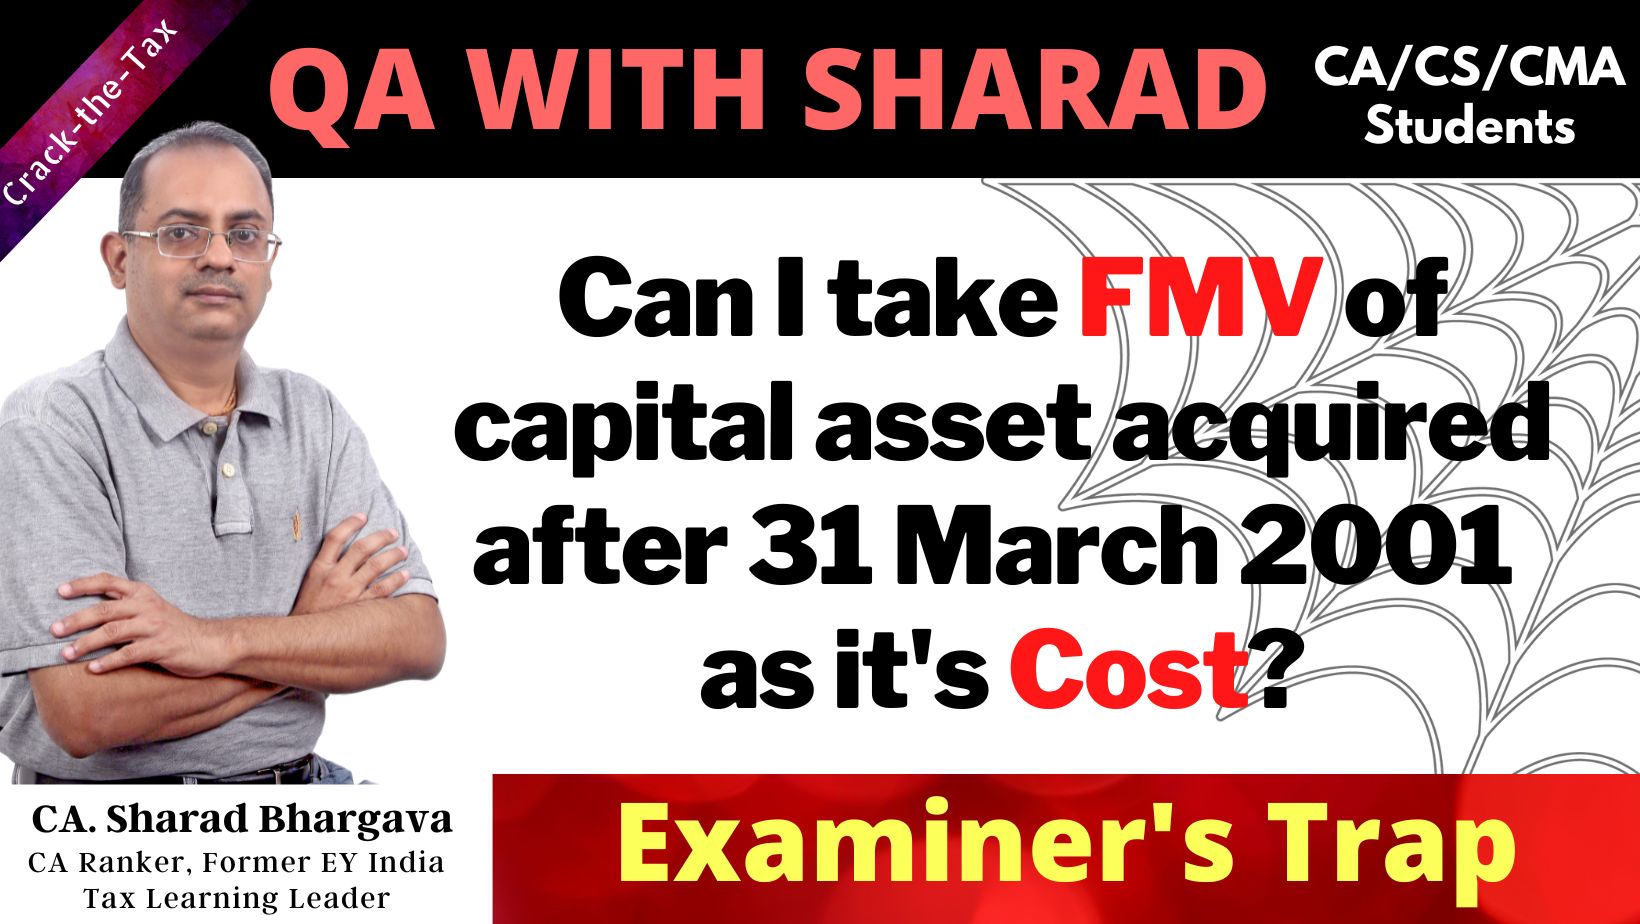 Can I take FMV of capital asset acquired after 31 March 2001 as it's Cost? // By CA. Sharad Bhargava